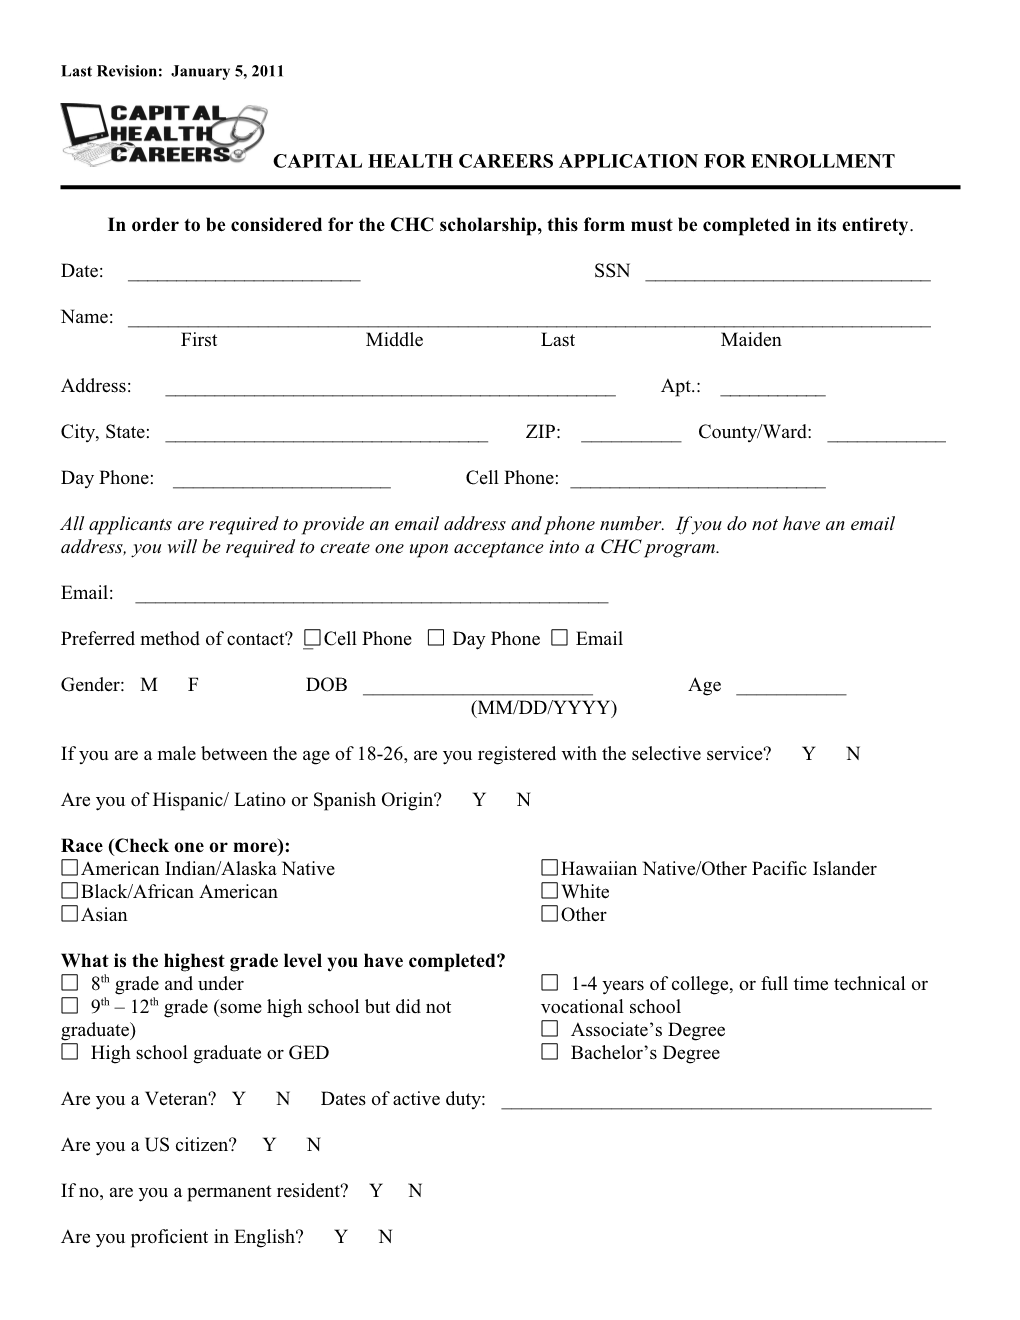 Capital Health Careers Application for Enrollment